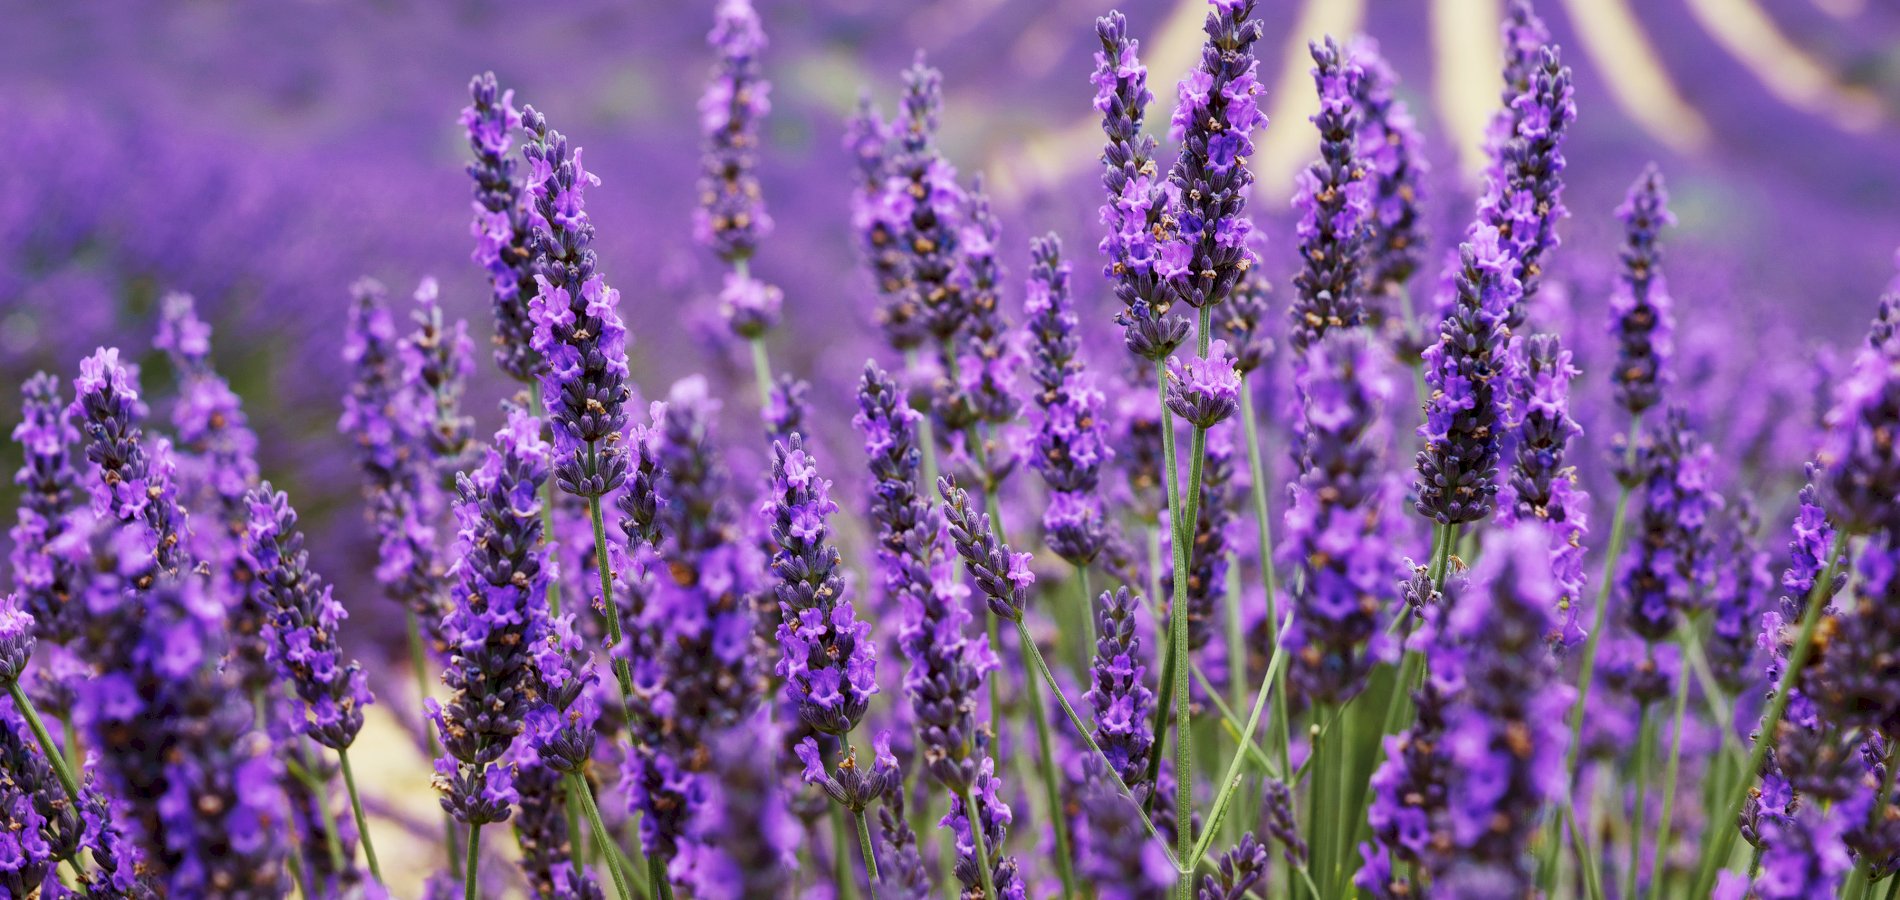 Ophorus Tours - A Private Half Day Trip from Aix en Provence to the Lavender Fields of Valensole 